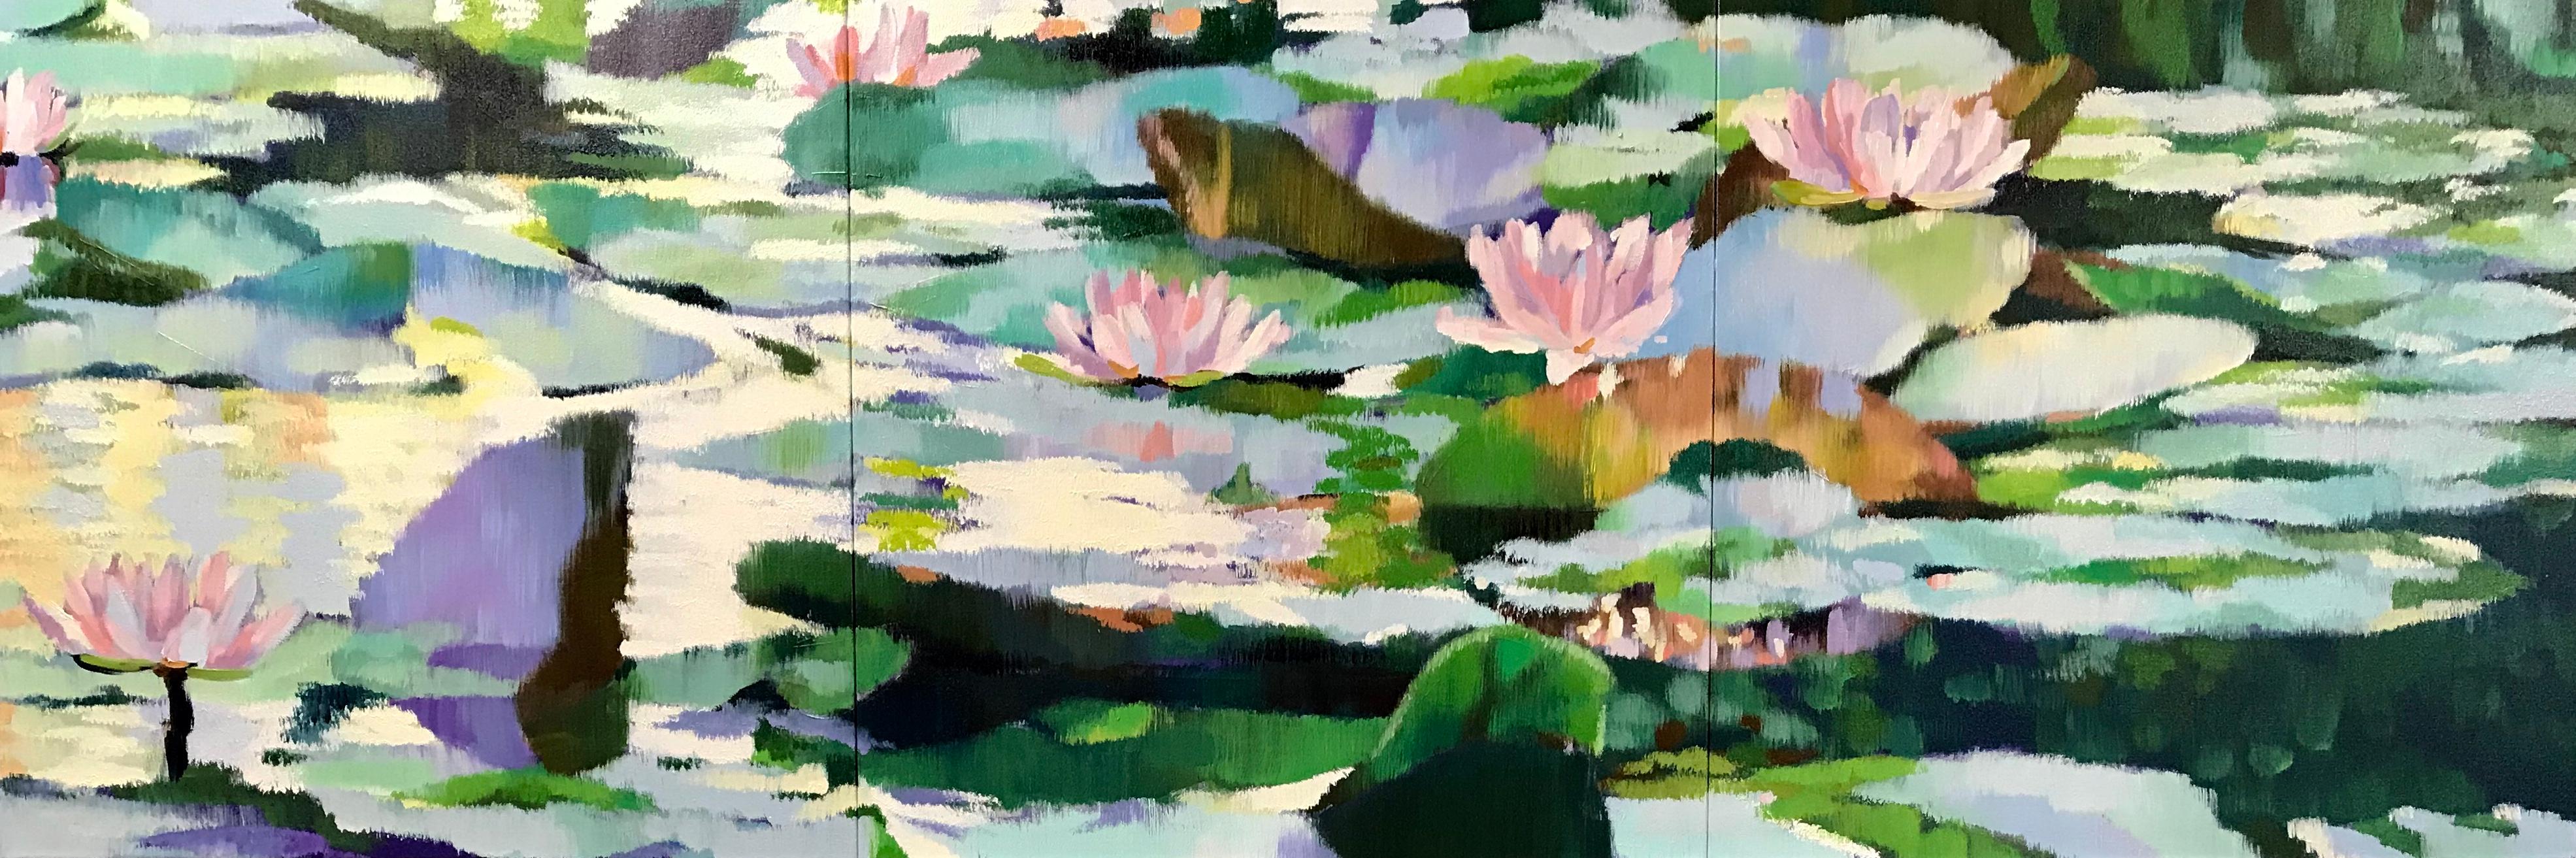 "Giverny XII", Contemporary, Oil, Painting, Landscape, Waterscape, Impressionist